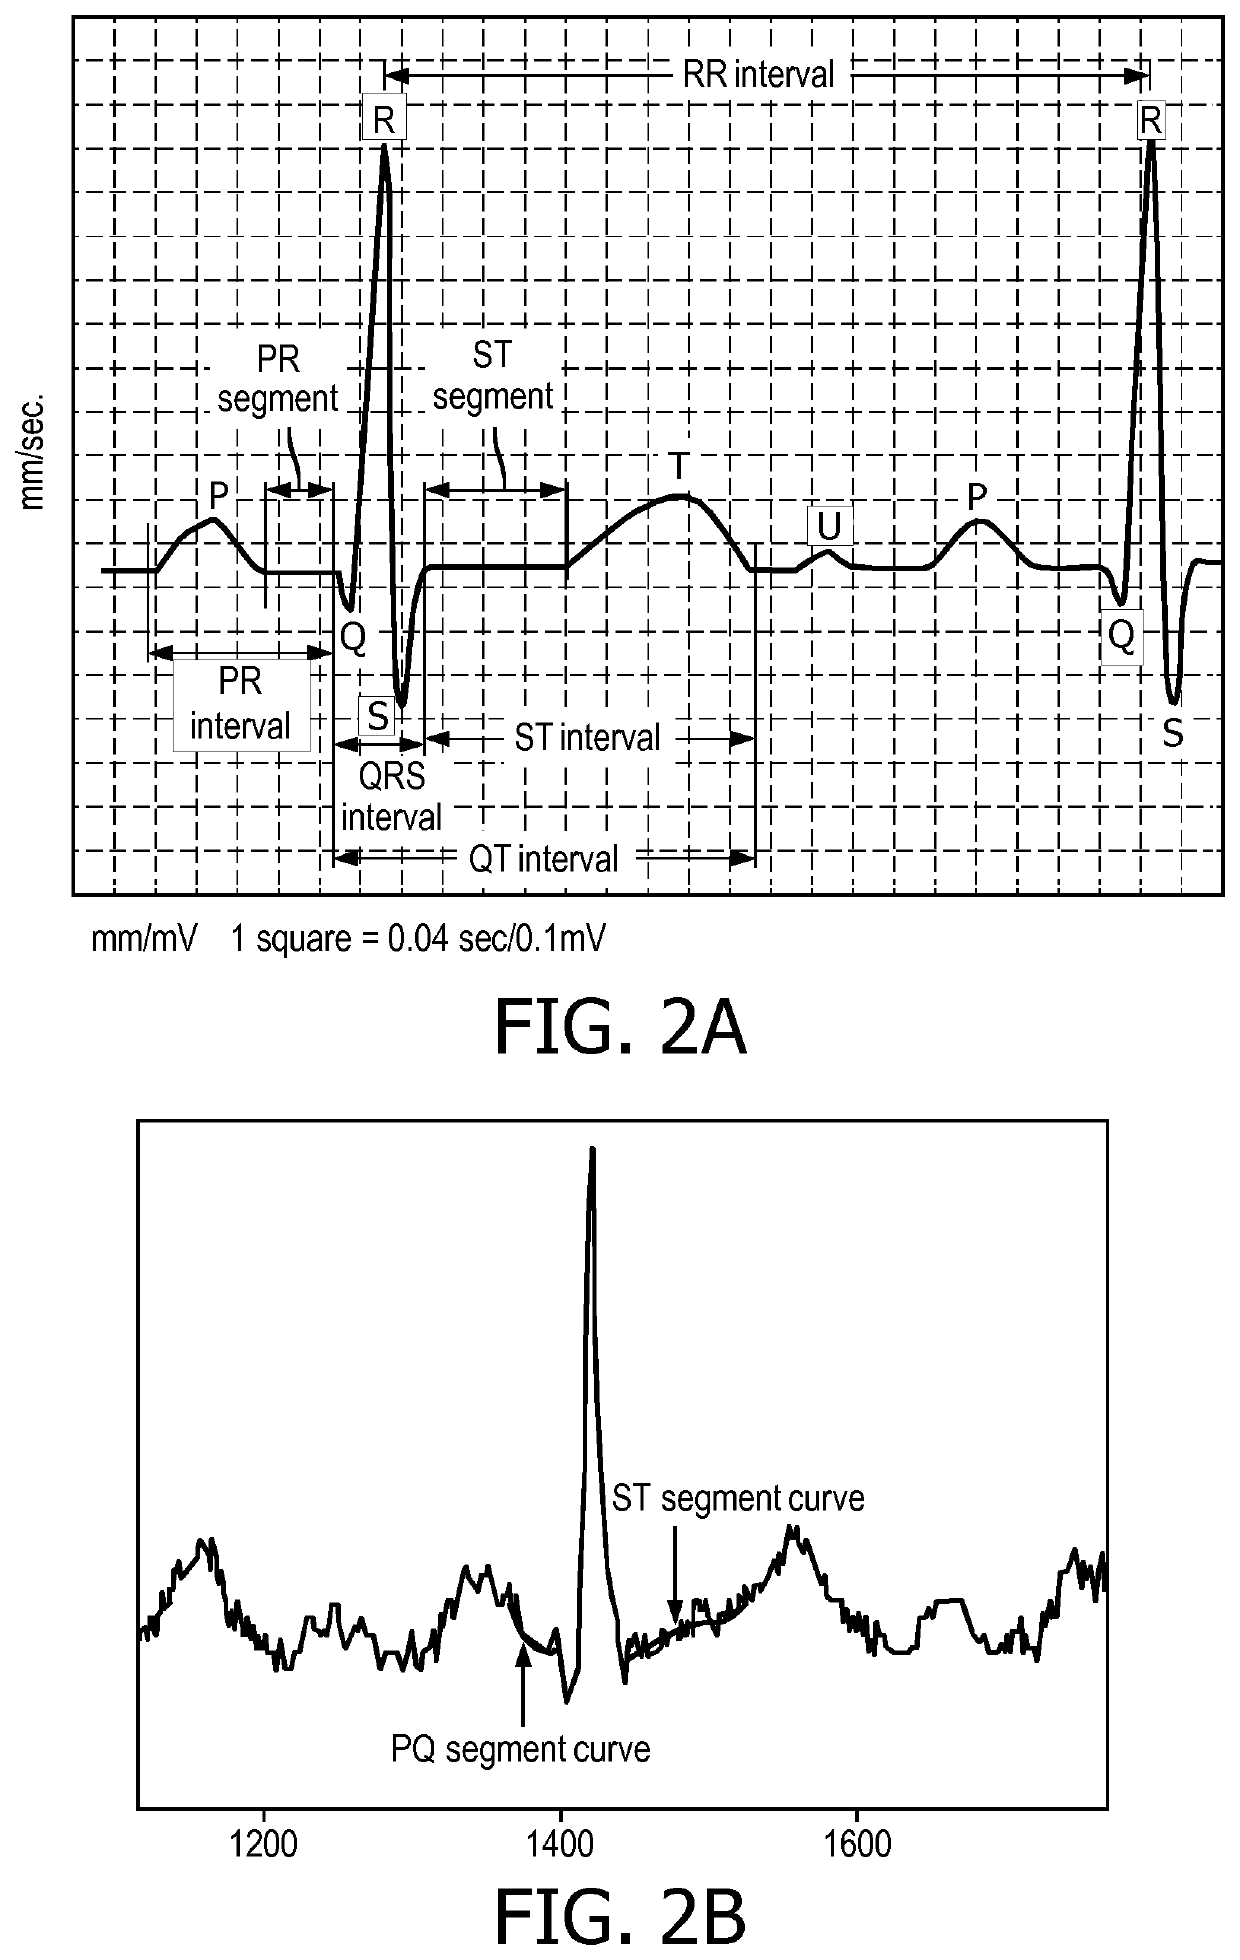 A device, system, and method for detecting and determining cardiac and non-cardiac pain